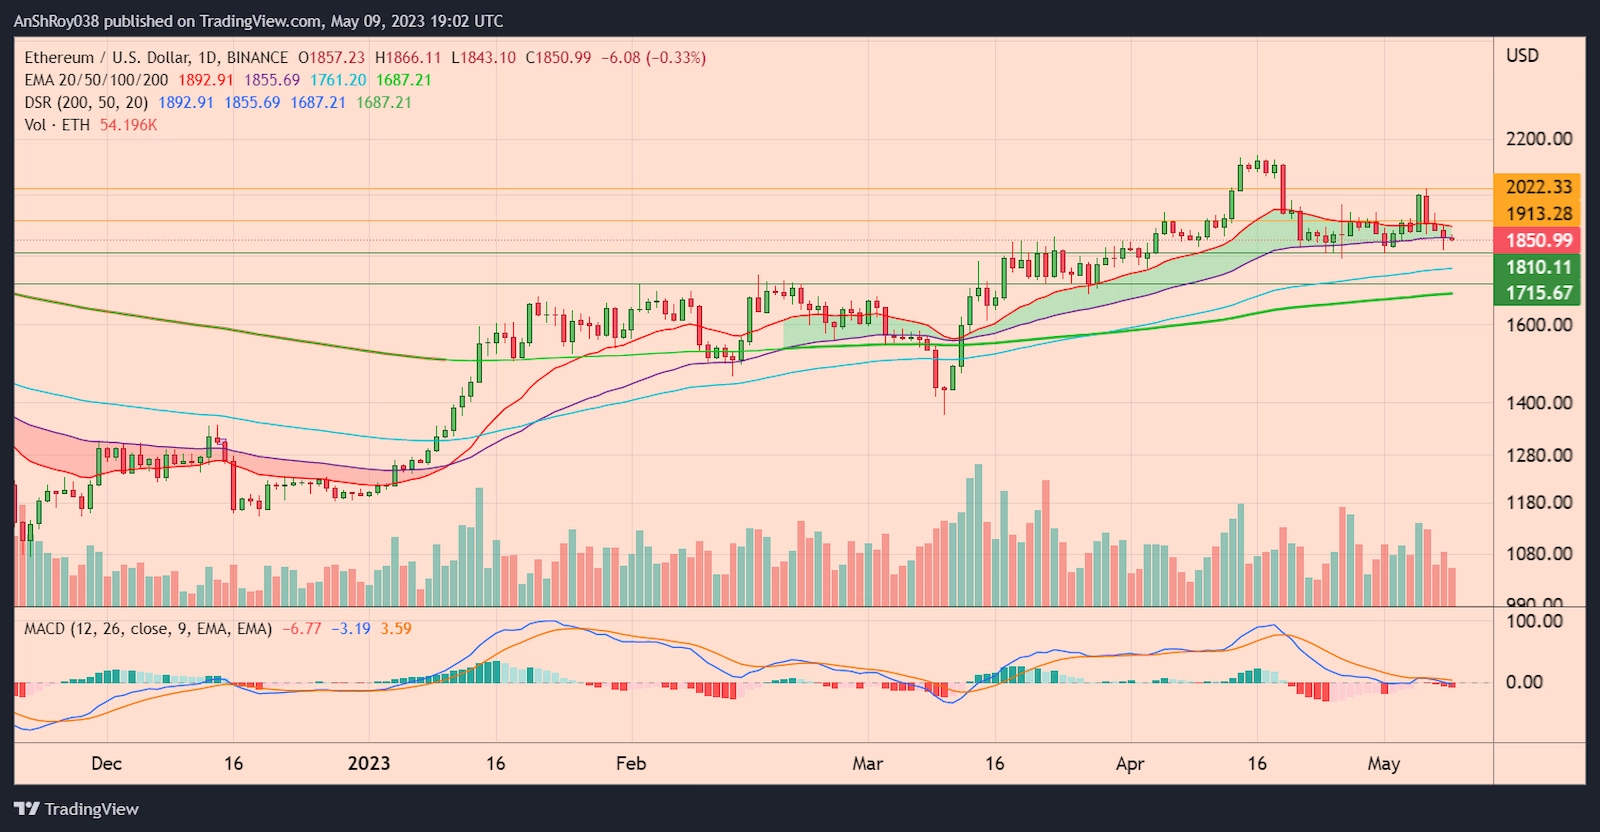 ETHUSD daily chart with MACD